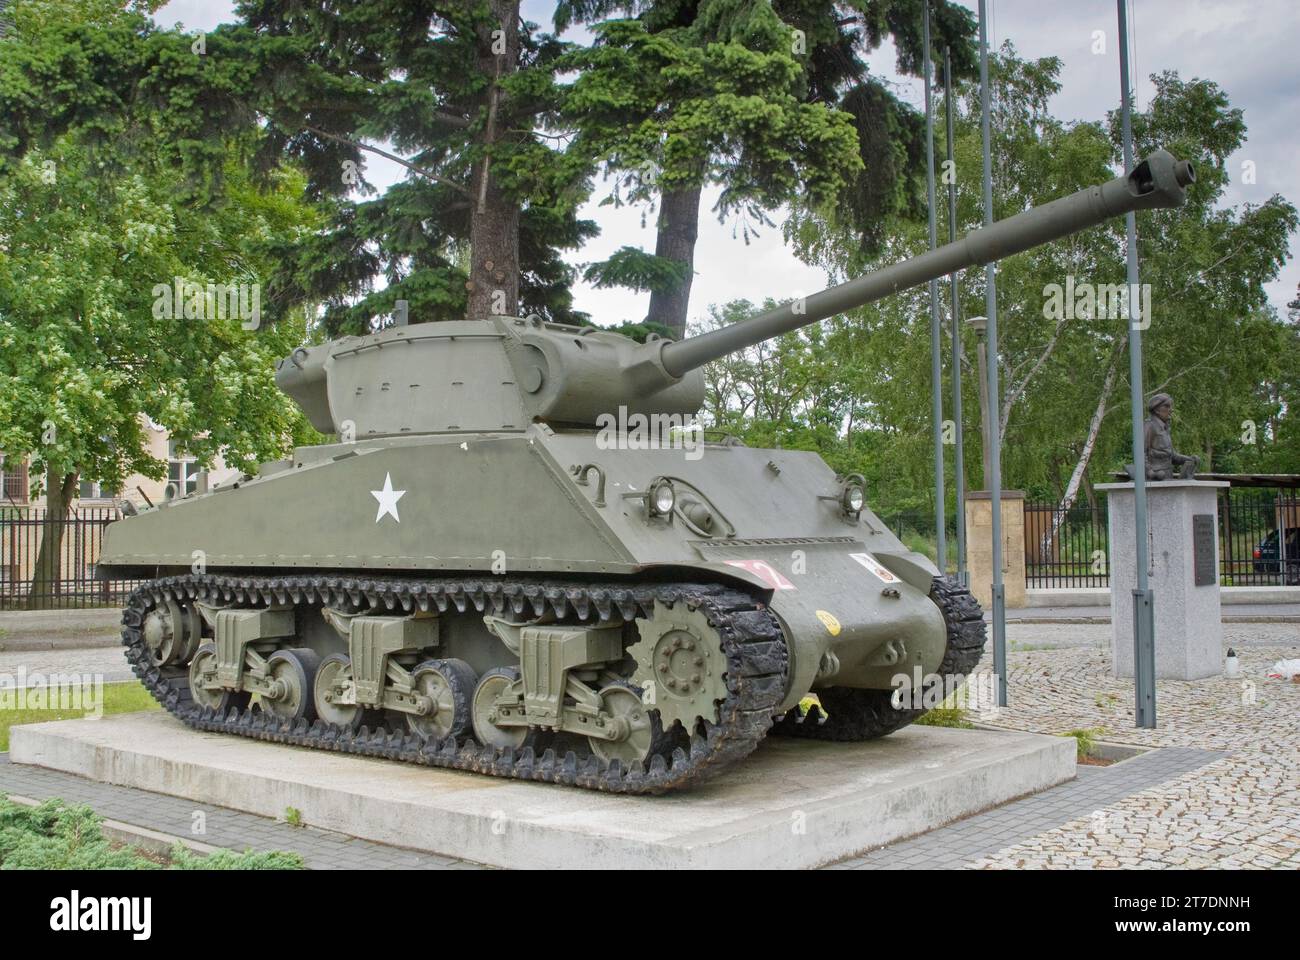 American M-36 Sherman tank from WWII displayed at headquarters of II Lubuska Armored Cavalry Division near Żagań, Lubusz Voivodeship, Poland Stock Photo